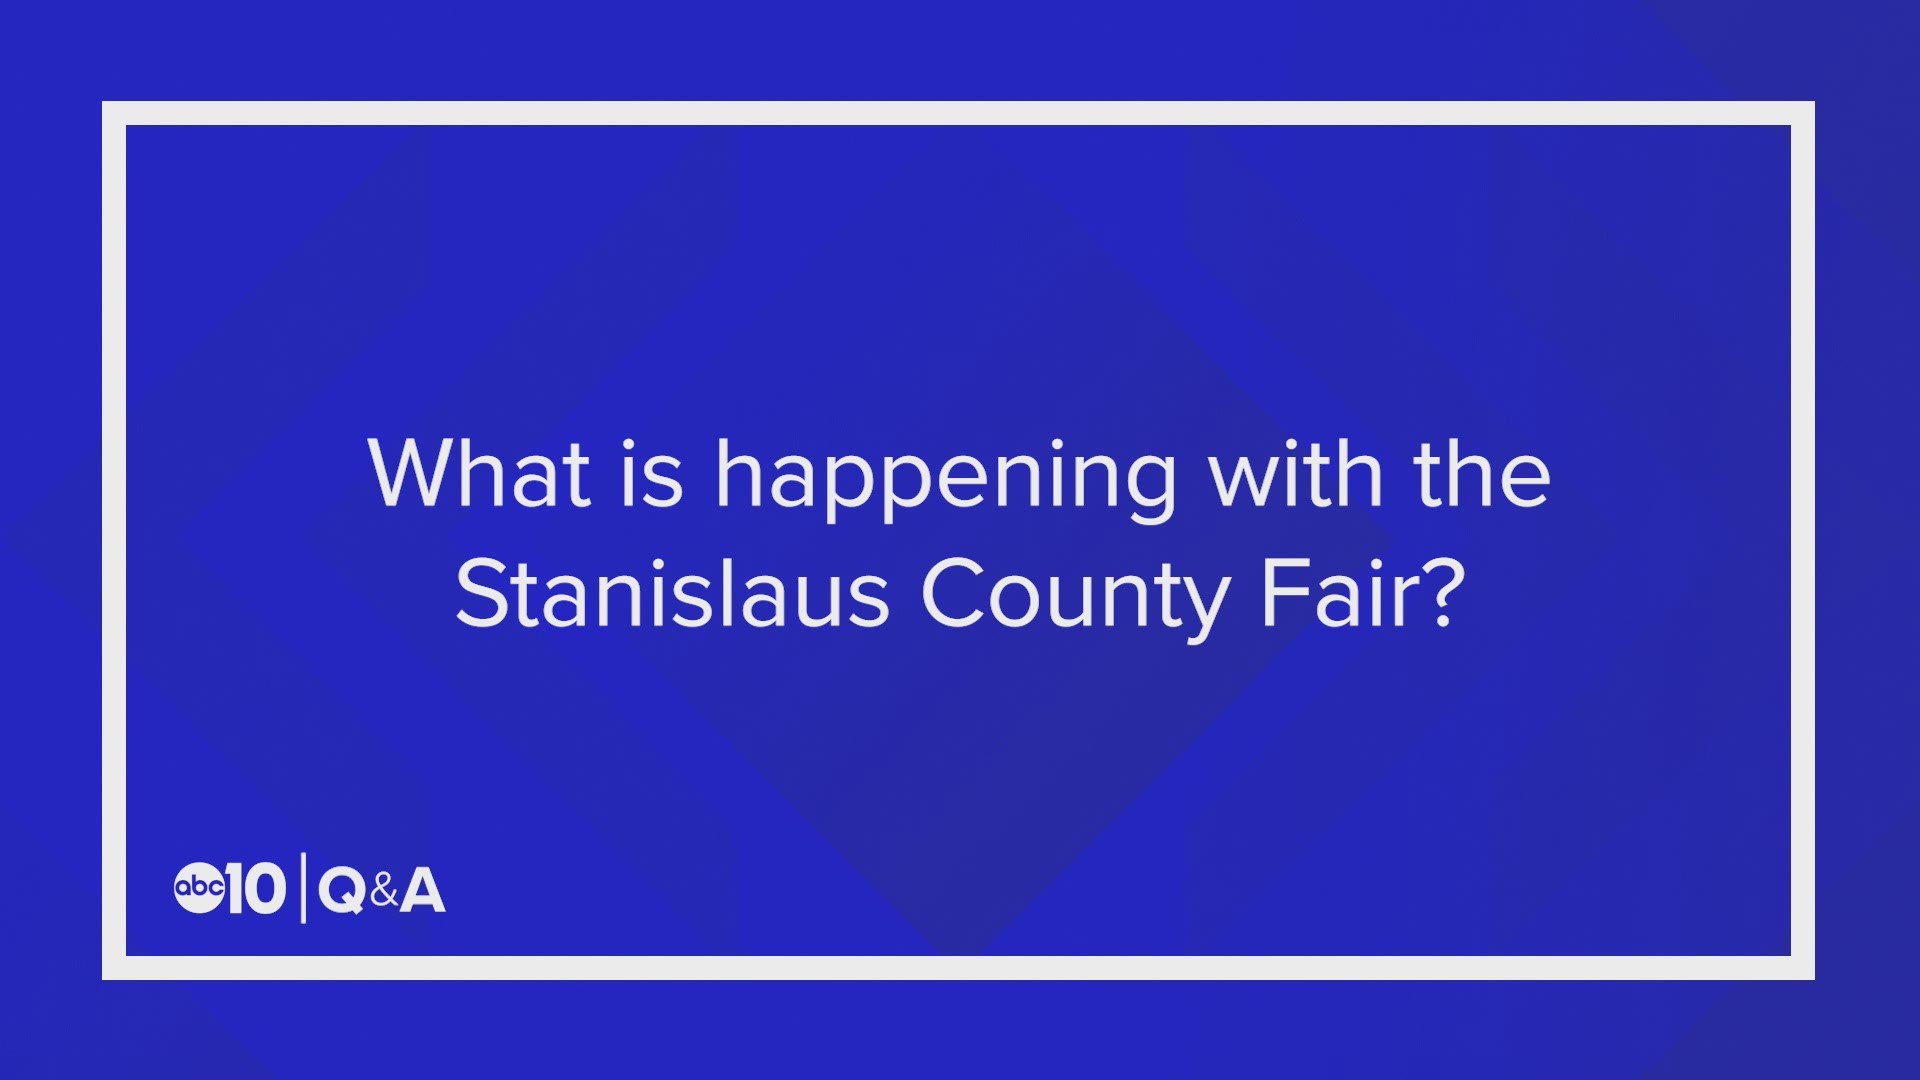 The CEO of the Stanislaus County Fair explains what it means now that the fair is canceled for 2020 due to coronavirus and what it means for the future of the fair.